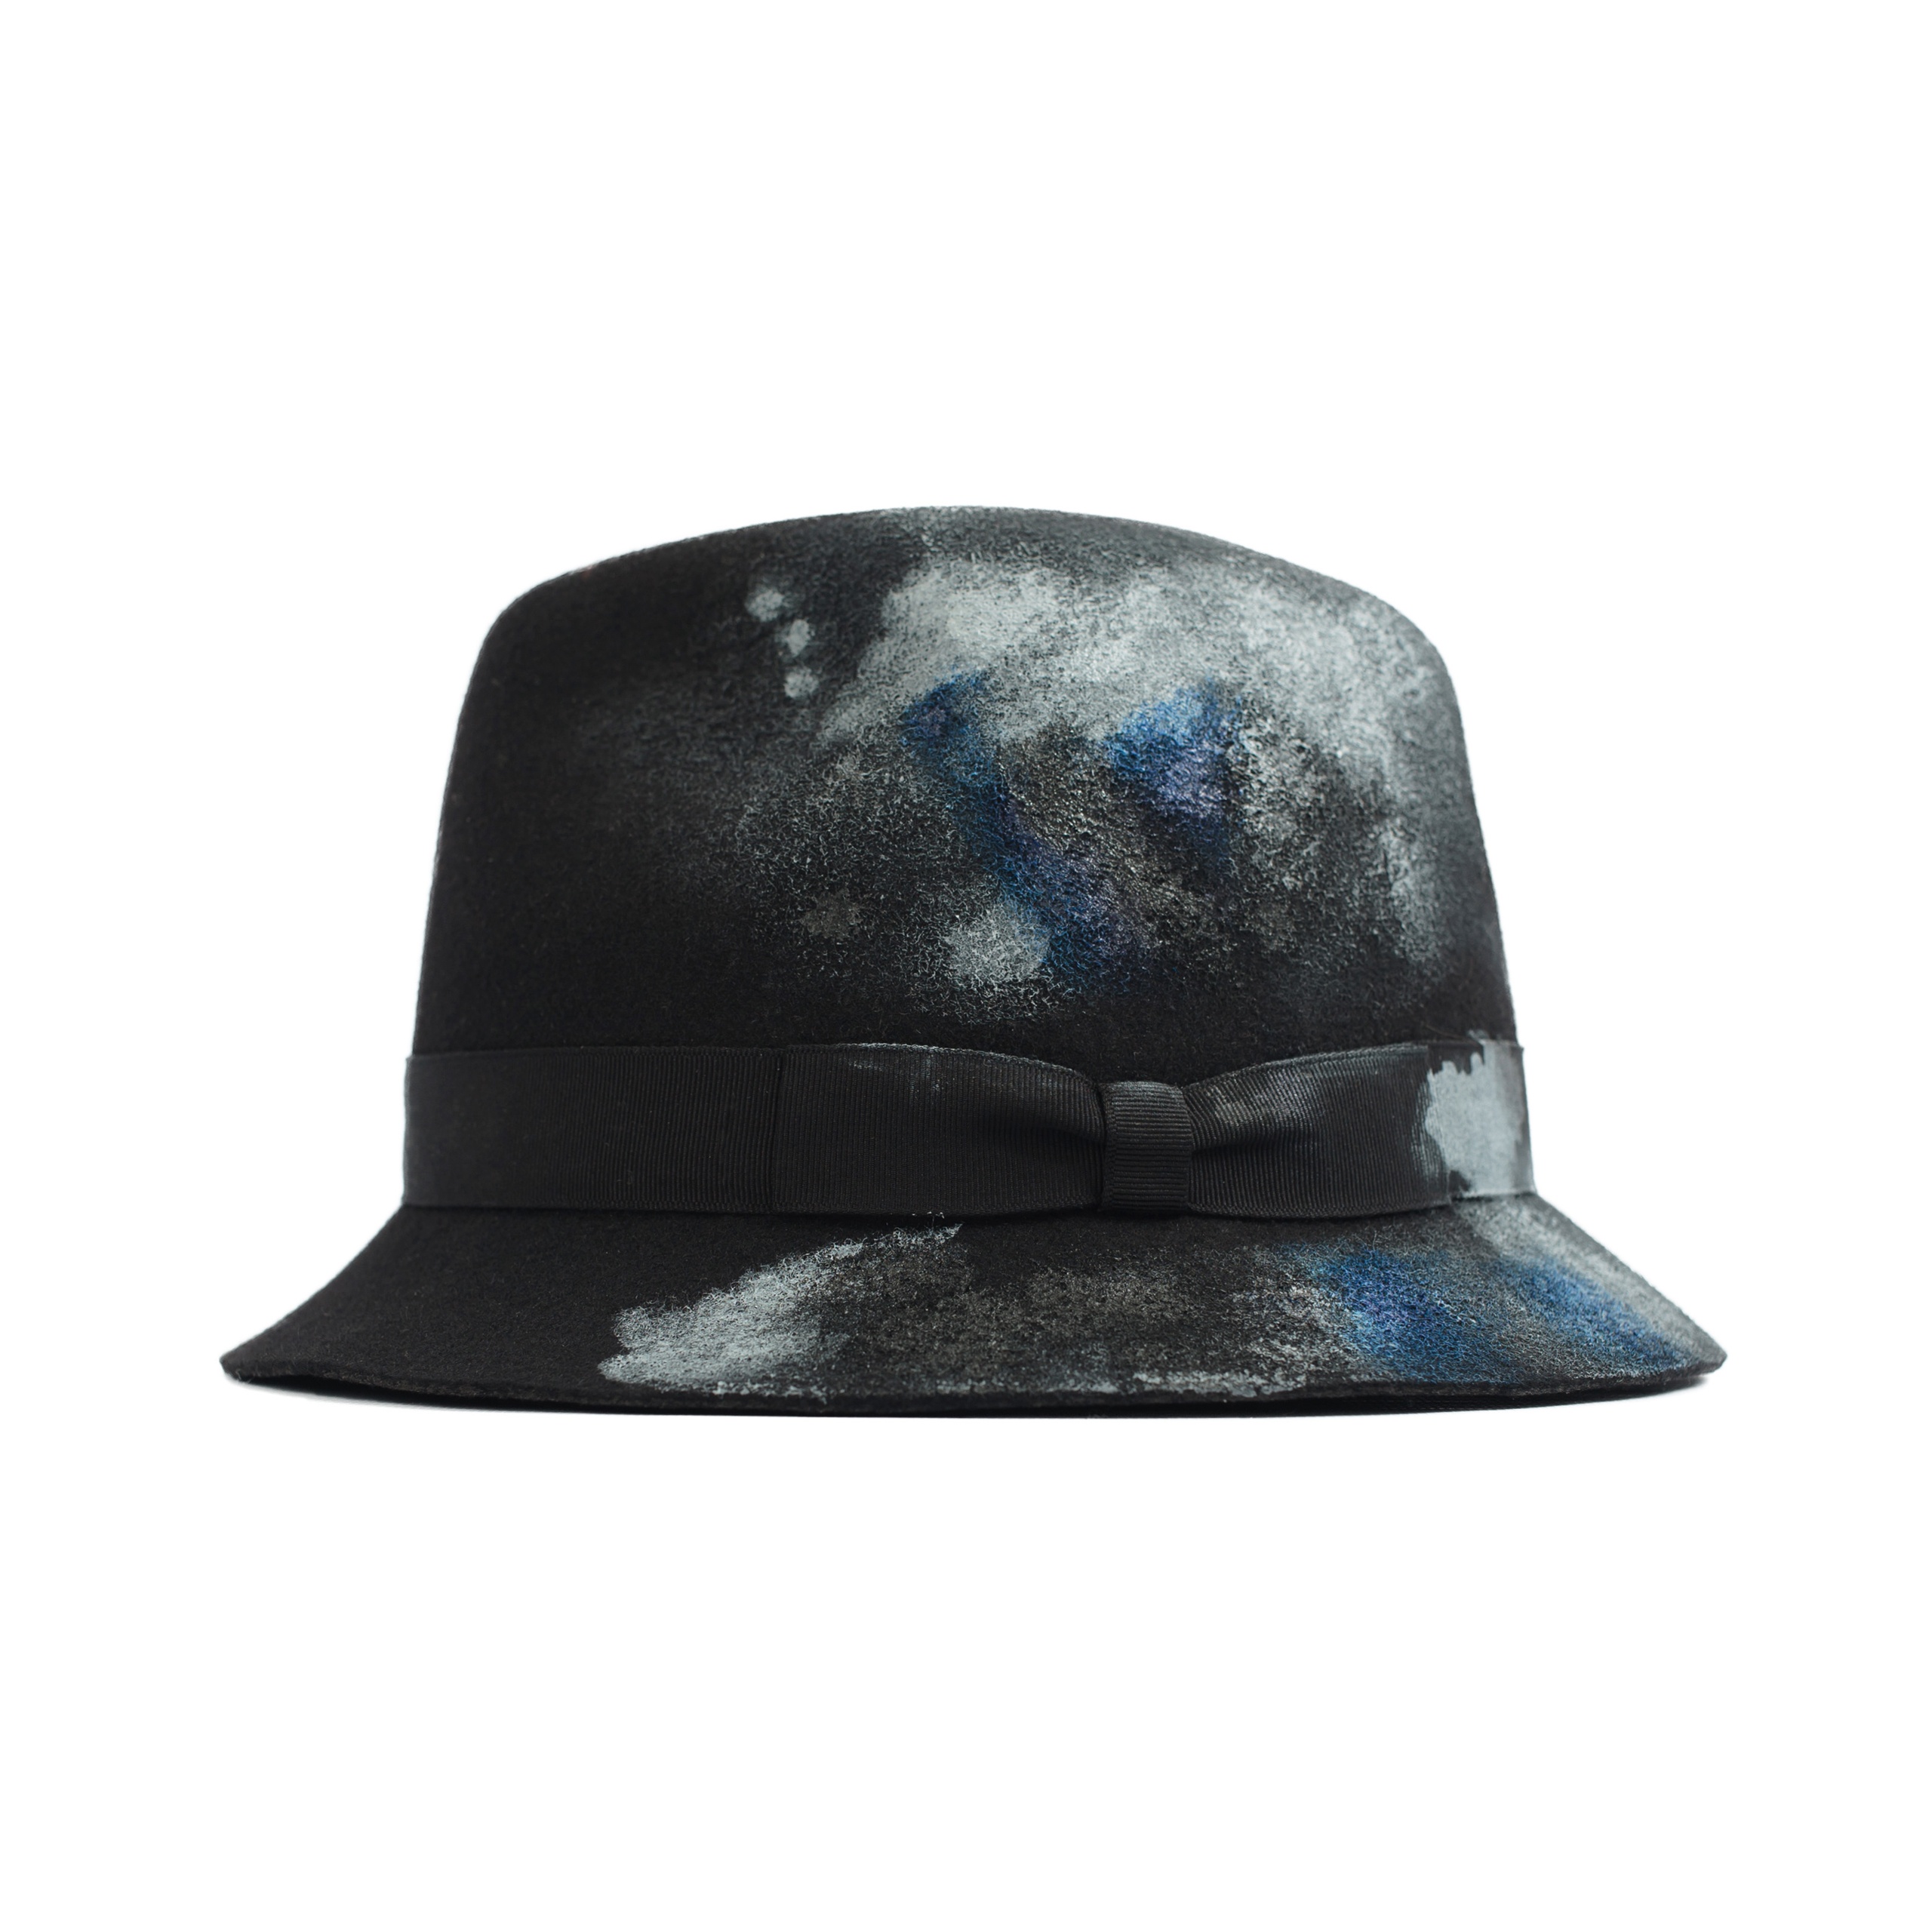 BLACK HAT WITH PAINT MARKS - 4